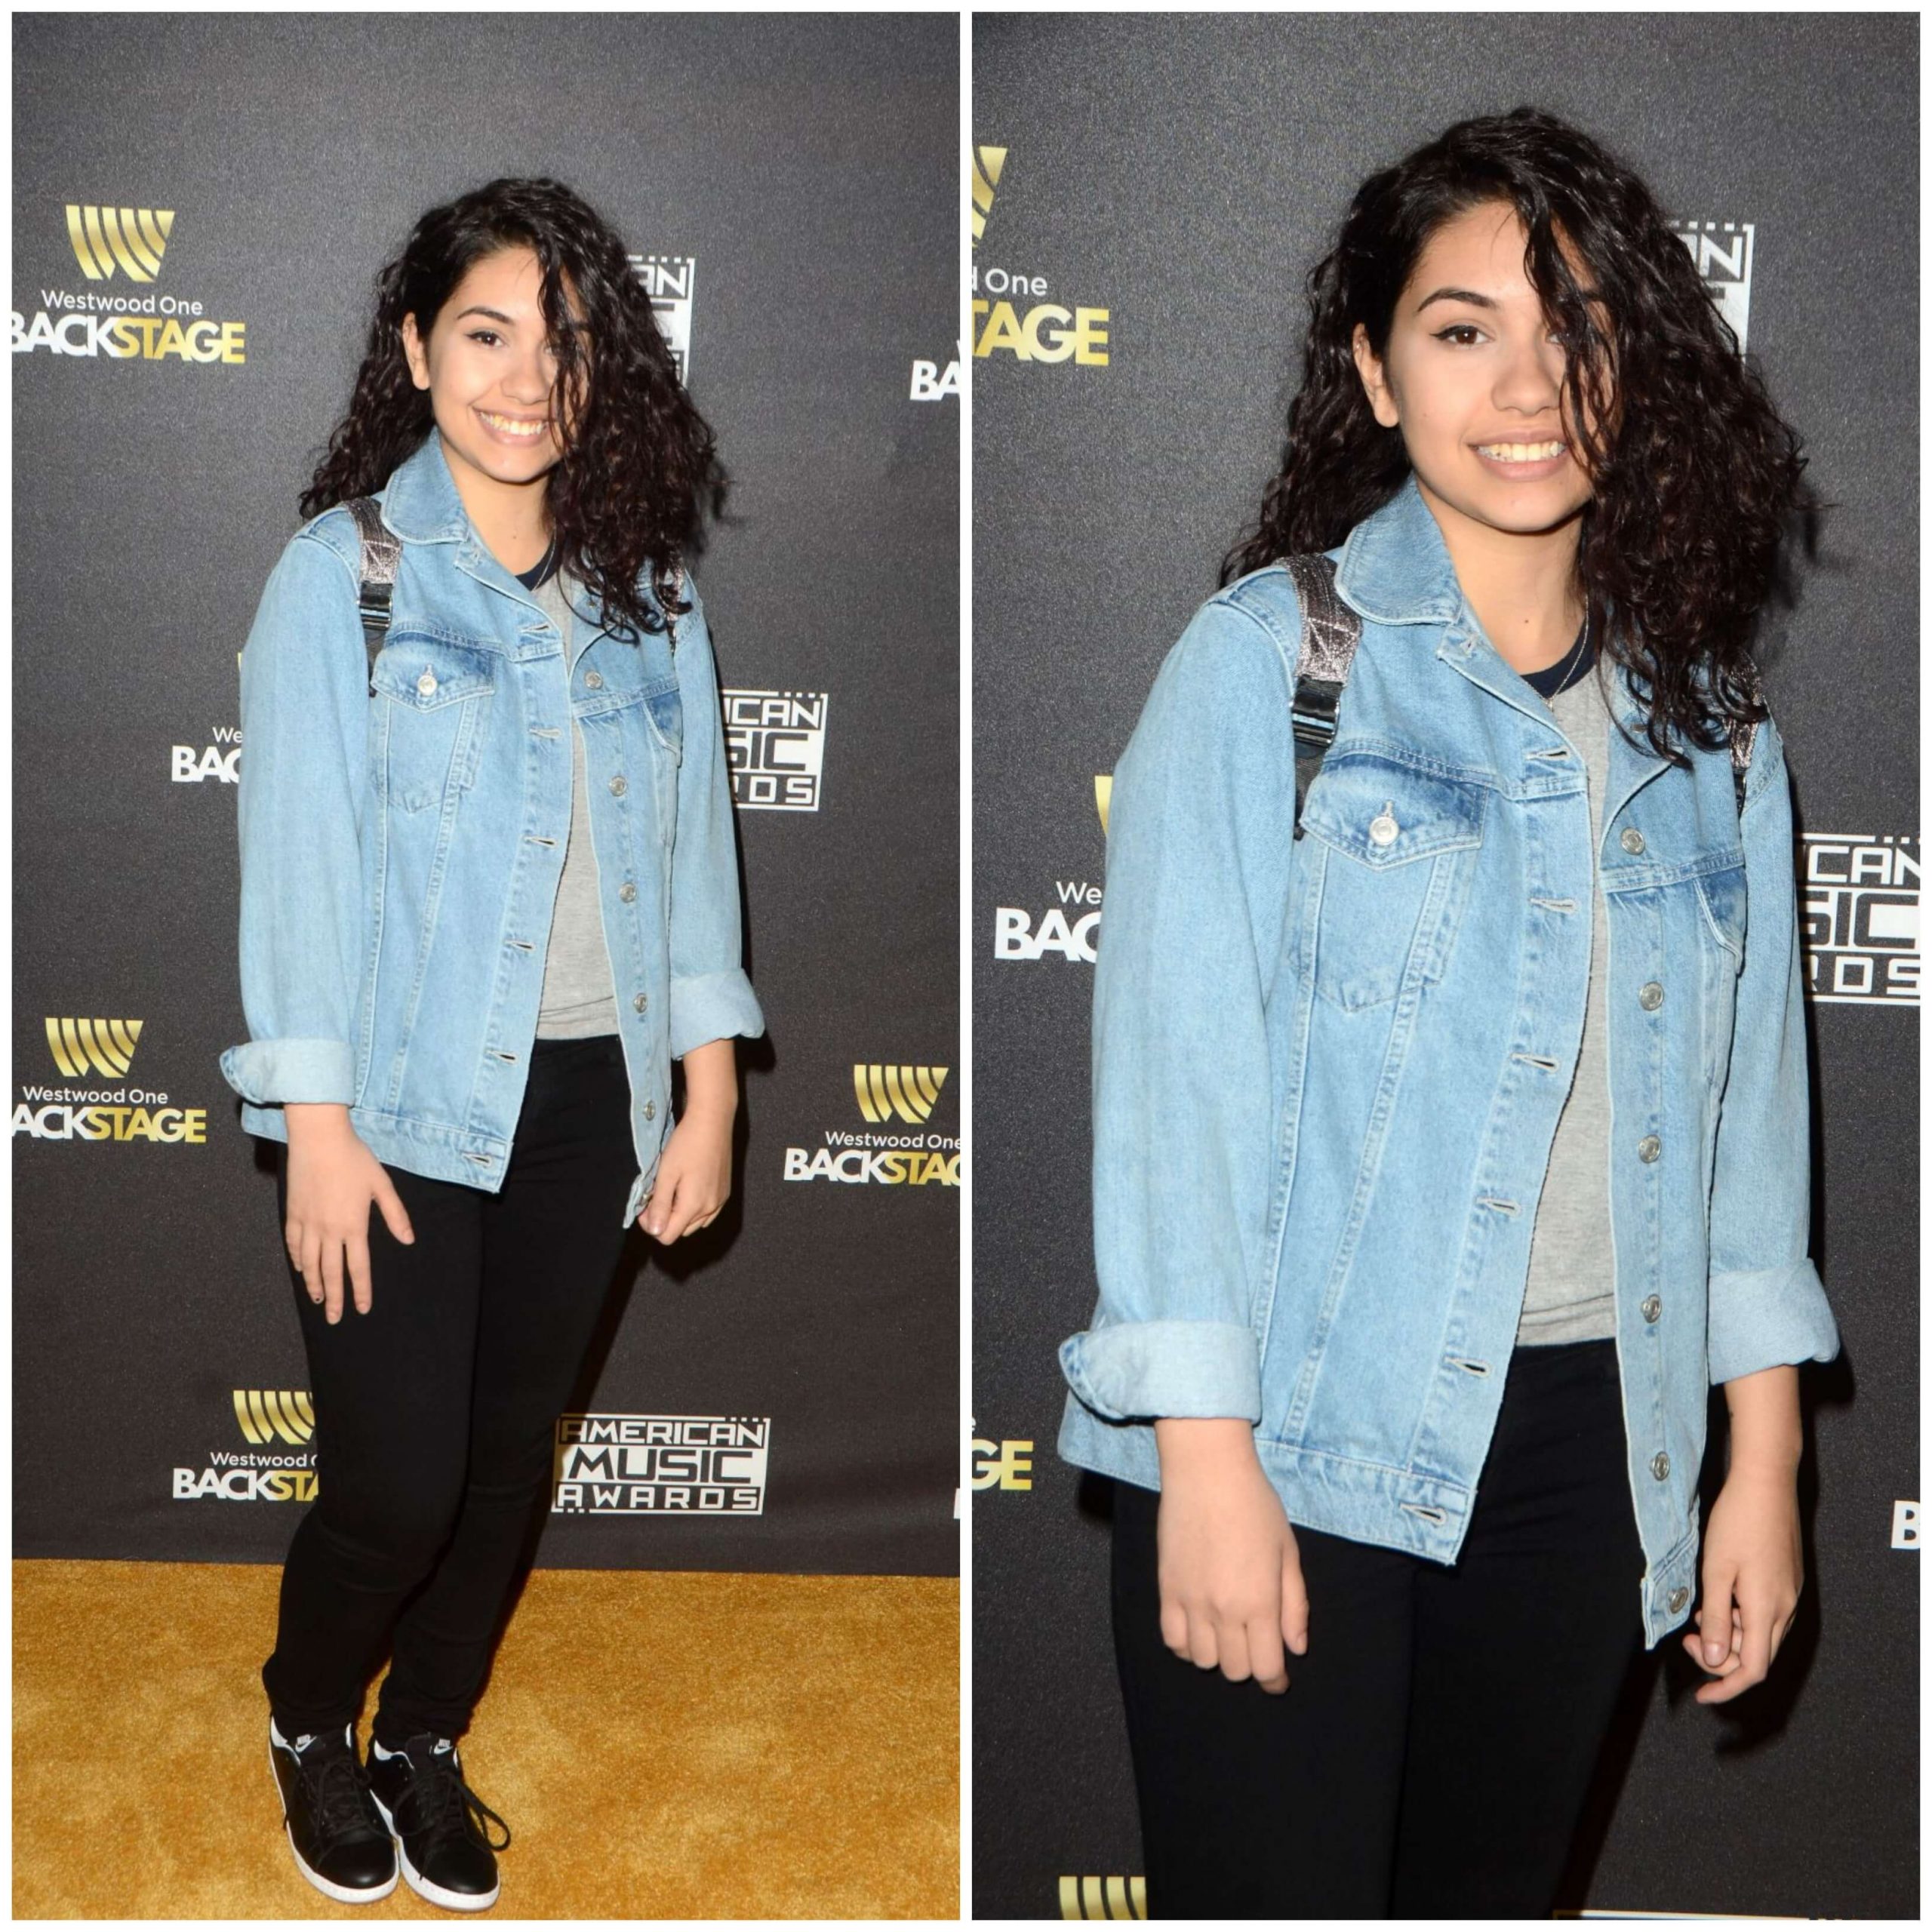 Alessia Cara – In Denim Jacket With Black Jeans  - Westwood One Presents the American Music Awards 2015 Radio Row Day 2 in Los Angeles